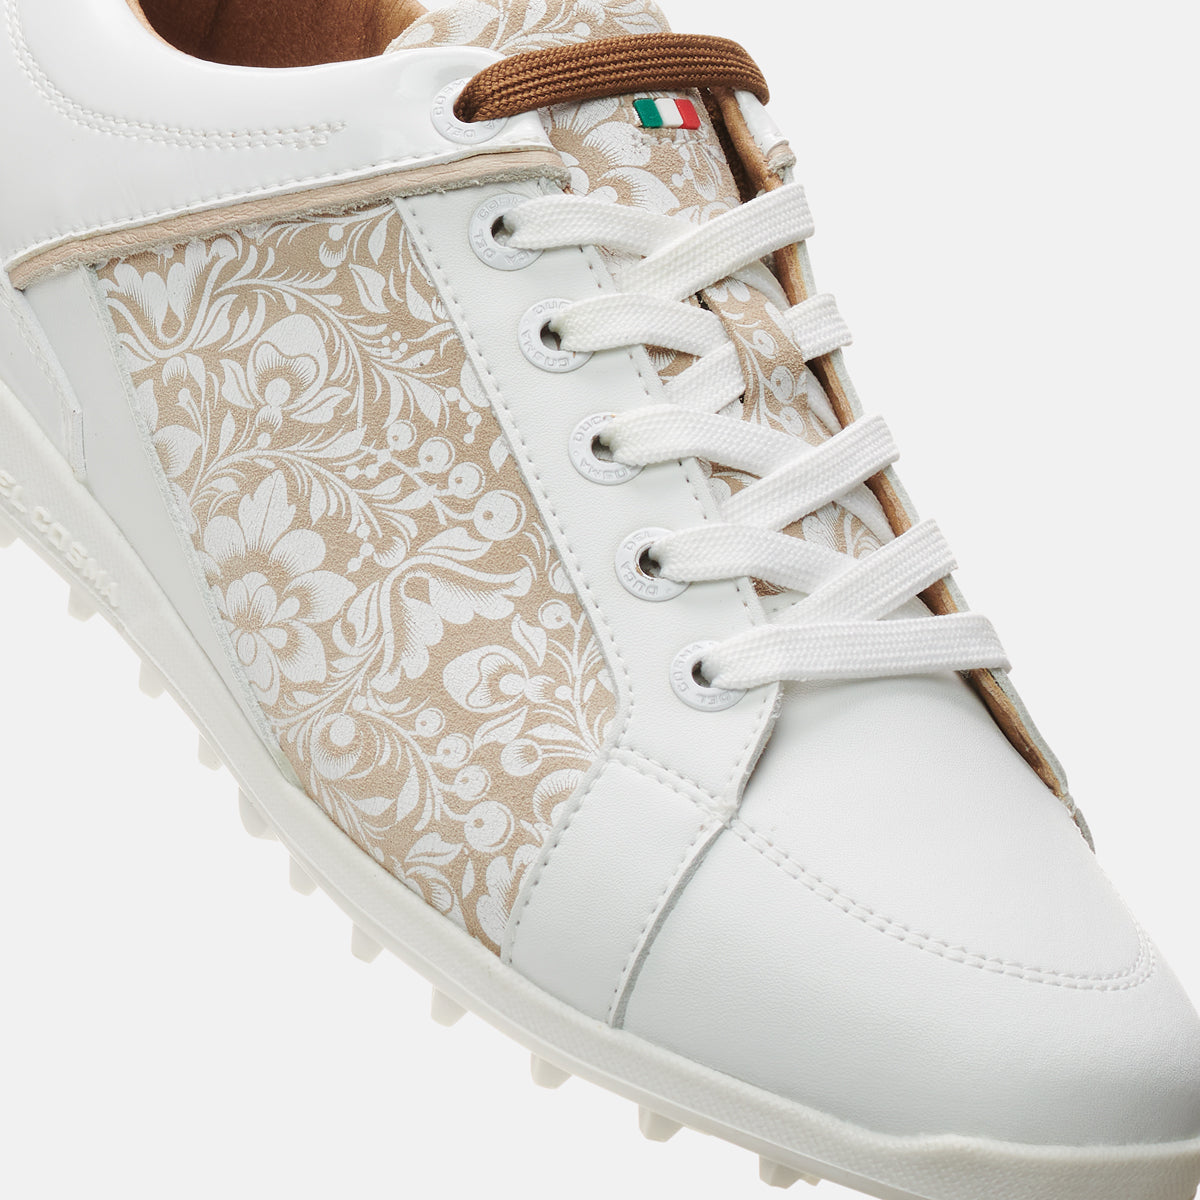 Caldes white Women's Golf Shoes Duca del Cosma Waterproof best golf shoe for the golf course